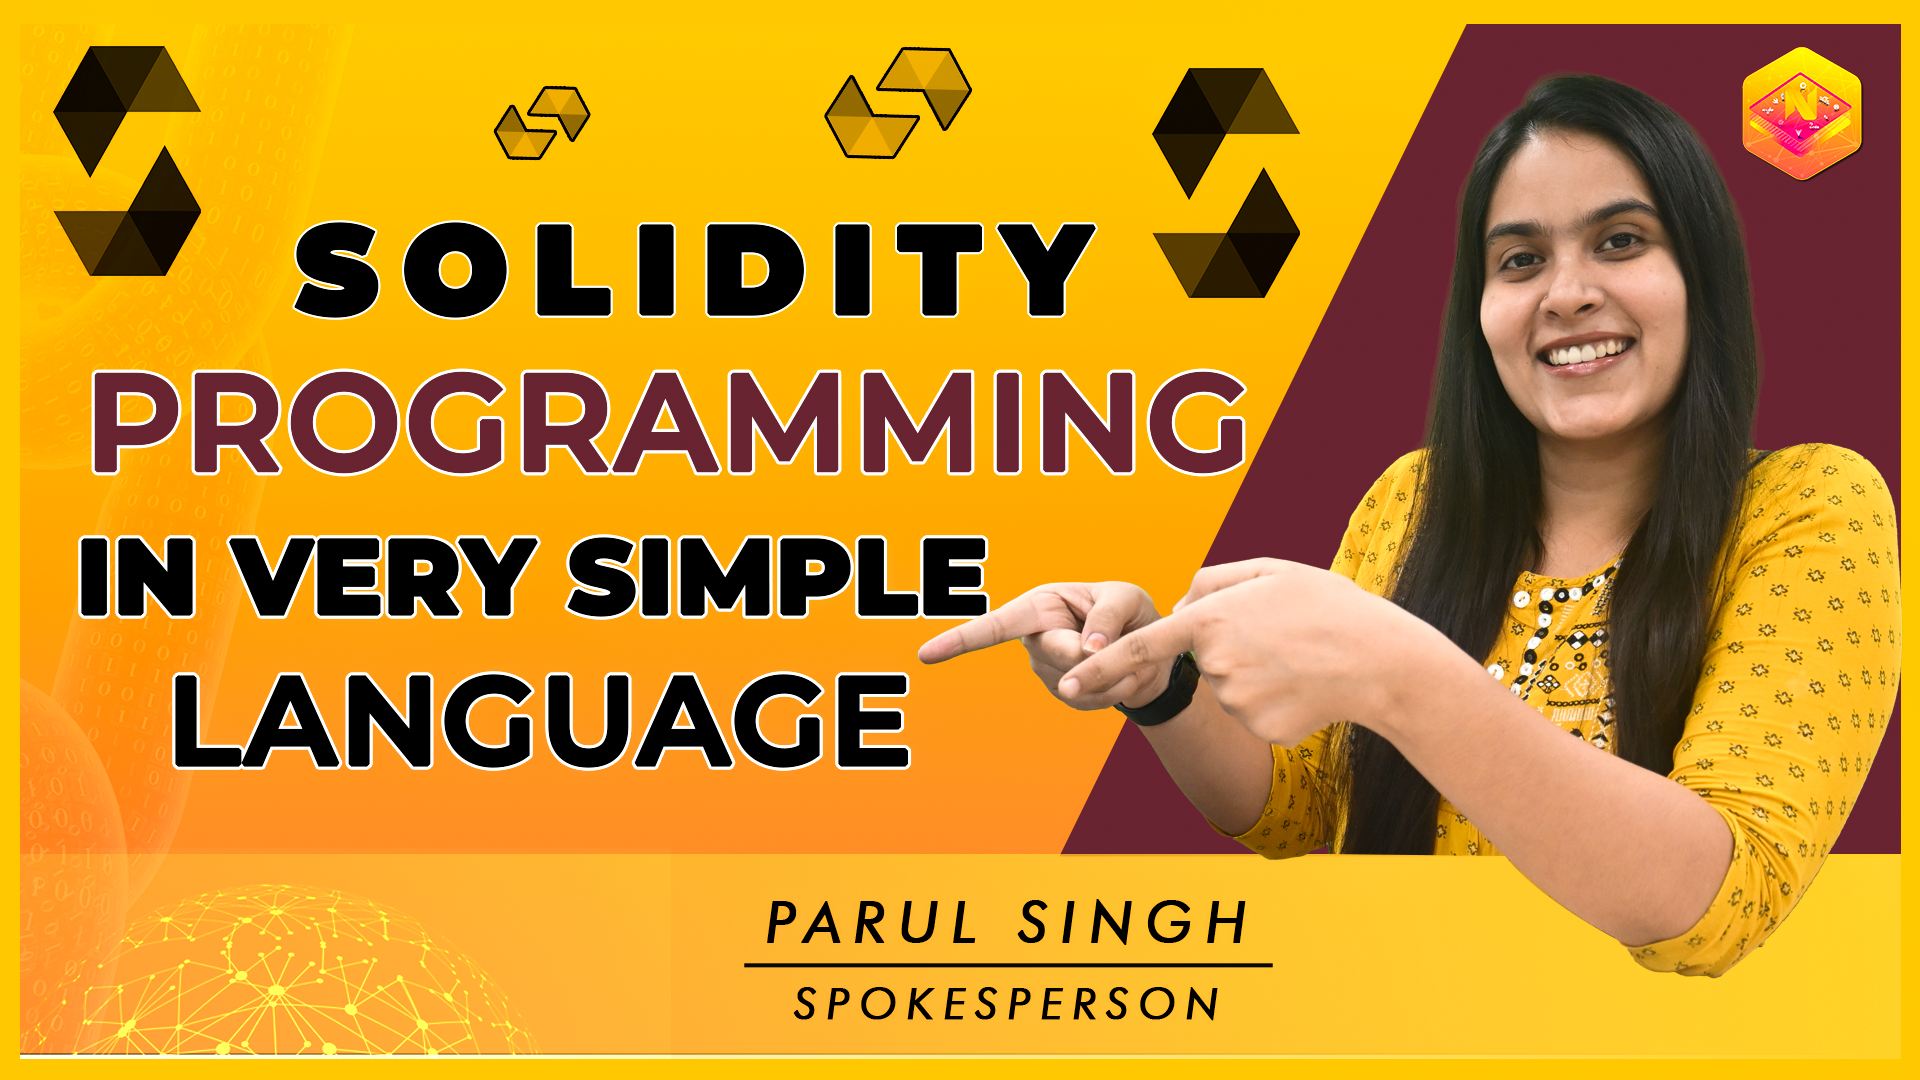 Solidity Programming in very simple Language